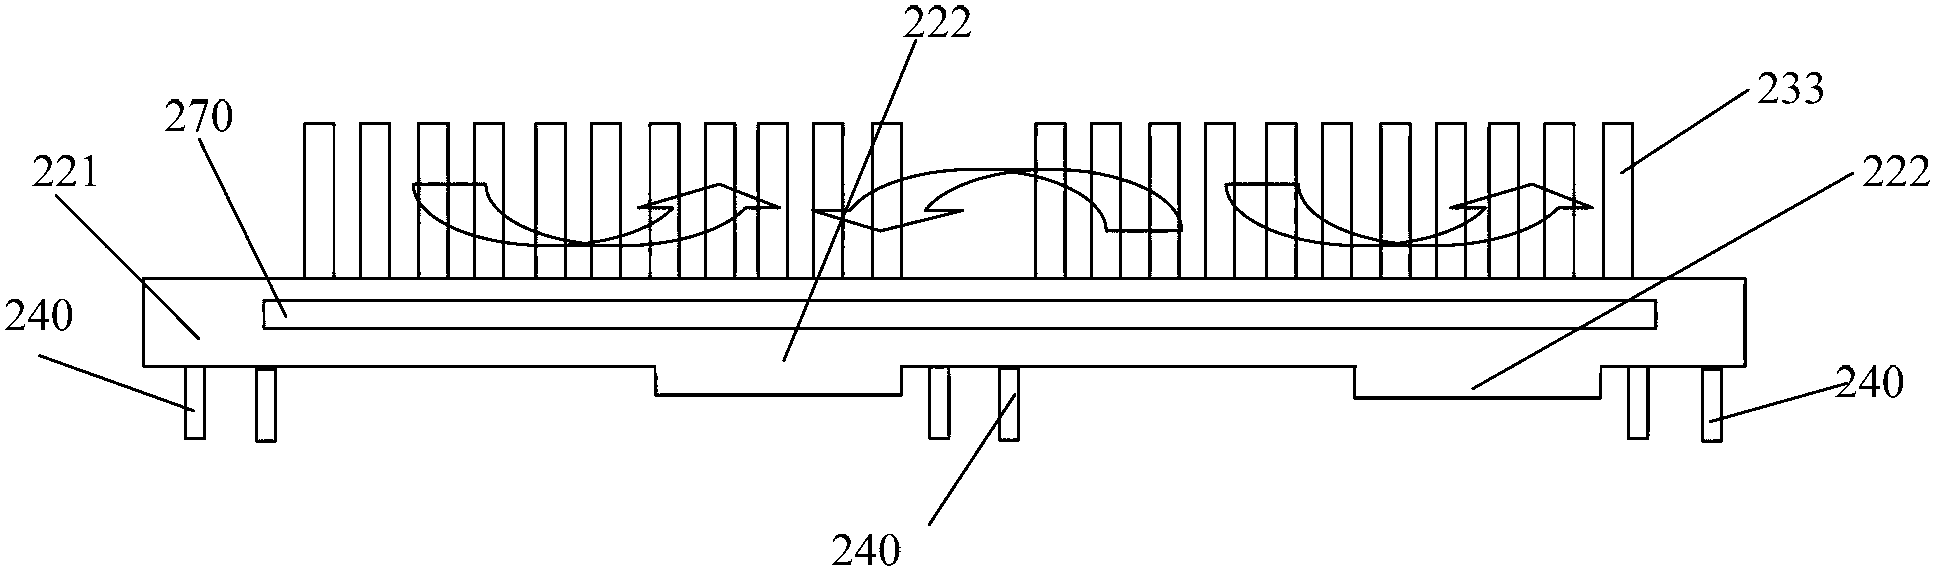 Heat radiator shared by multiple chips and circuit board provided with same